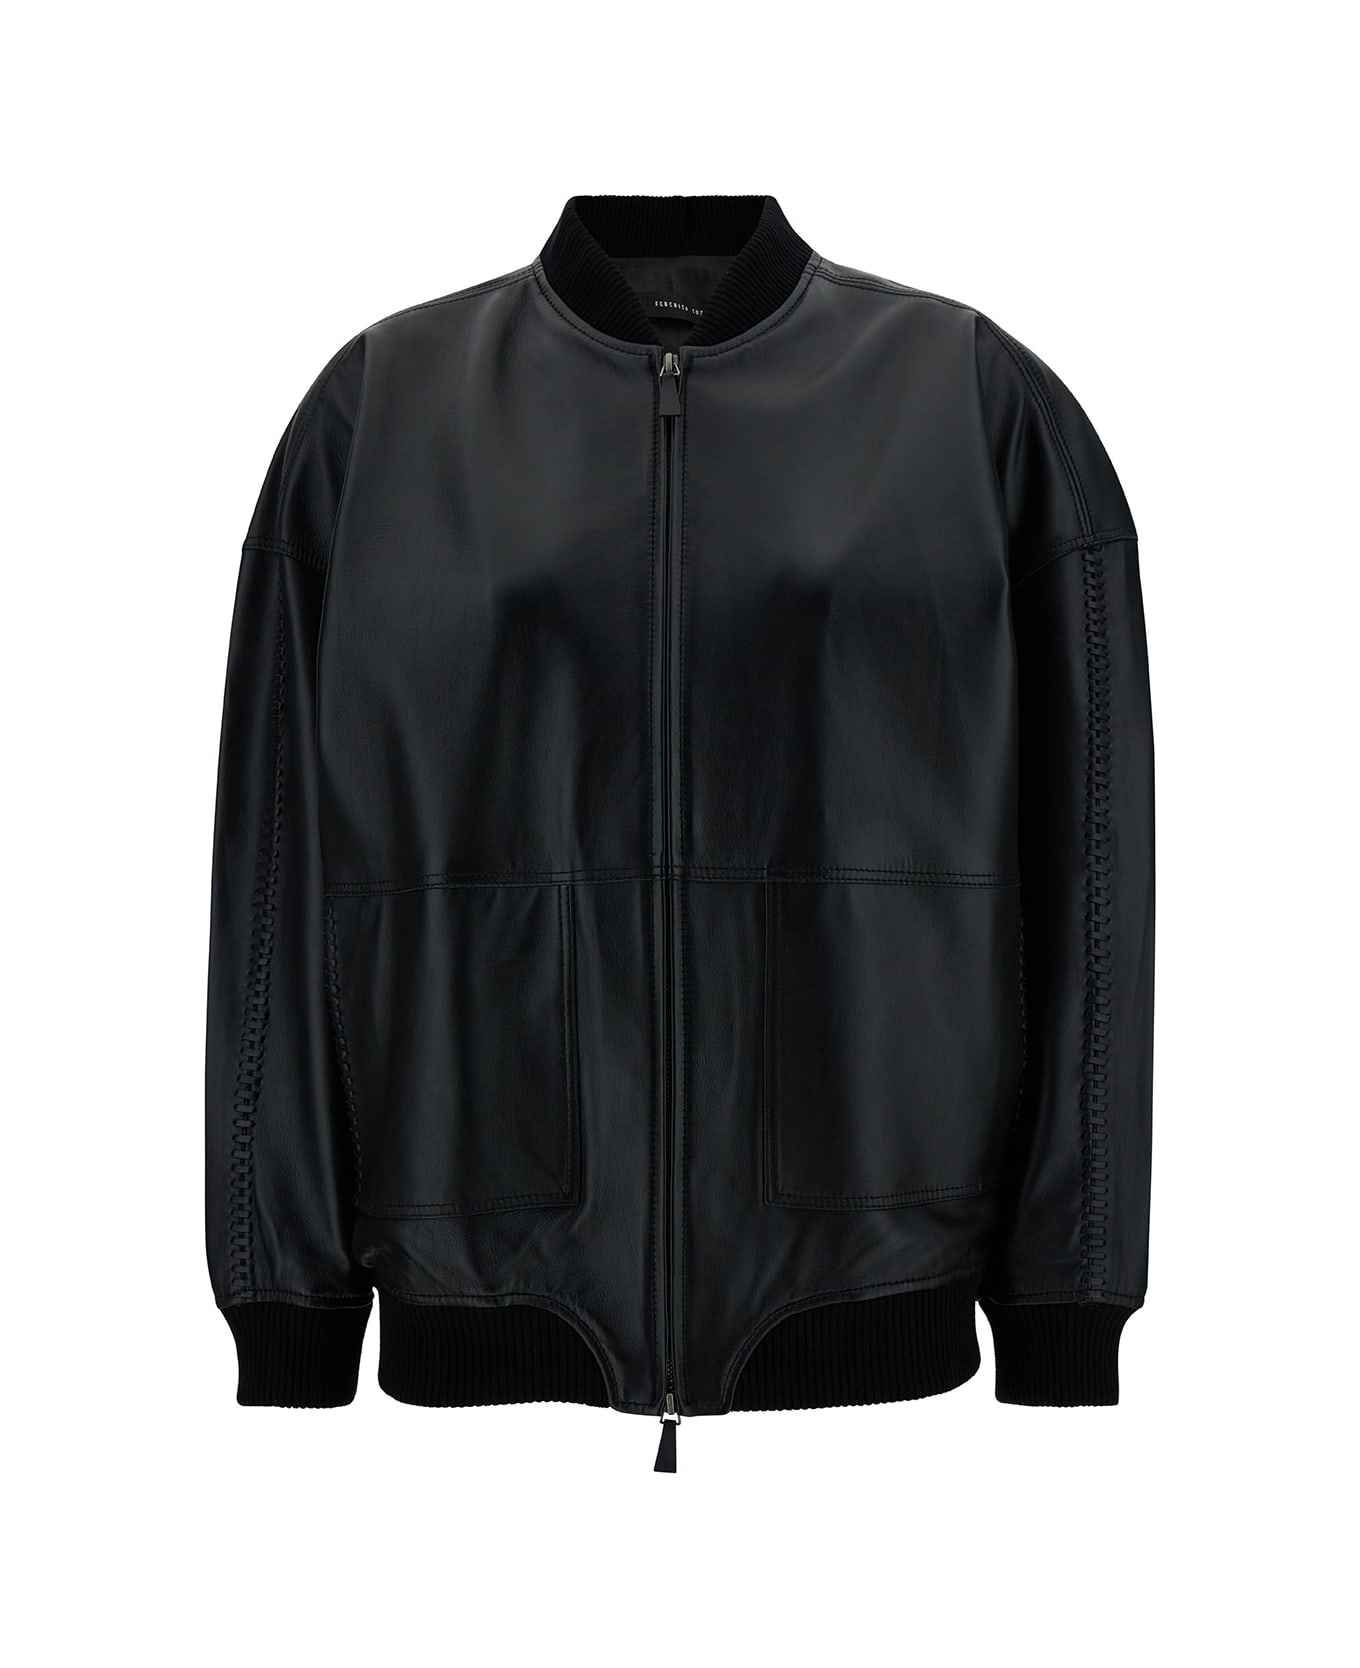 Federica Tosi Black Bomber Jacket With Ribbed Trim In Leather Woman - Black ジャケット